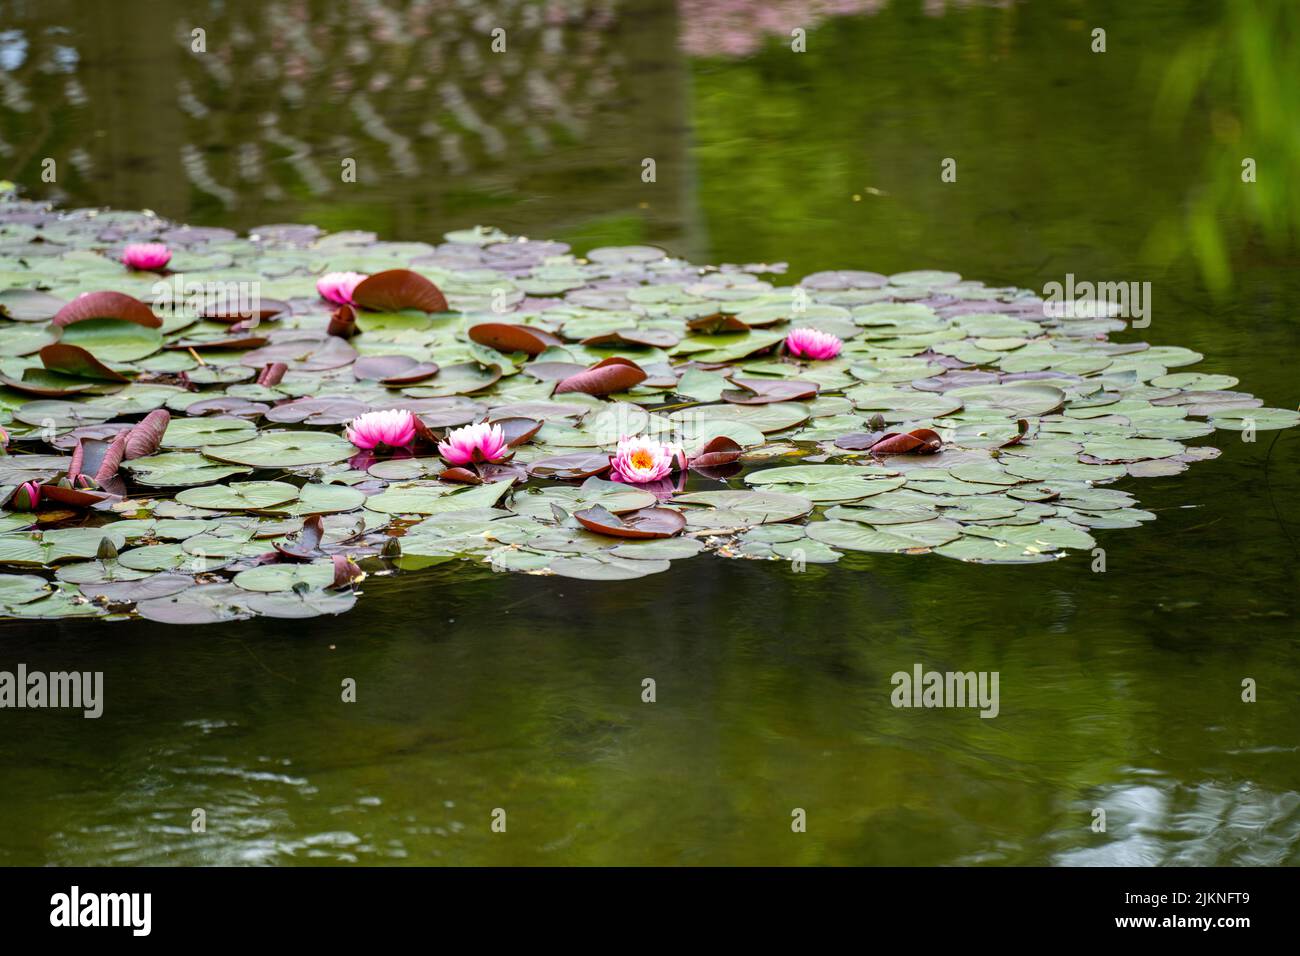 A lotus pond with blooming flowers uner the bright sunlight Stock Photo